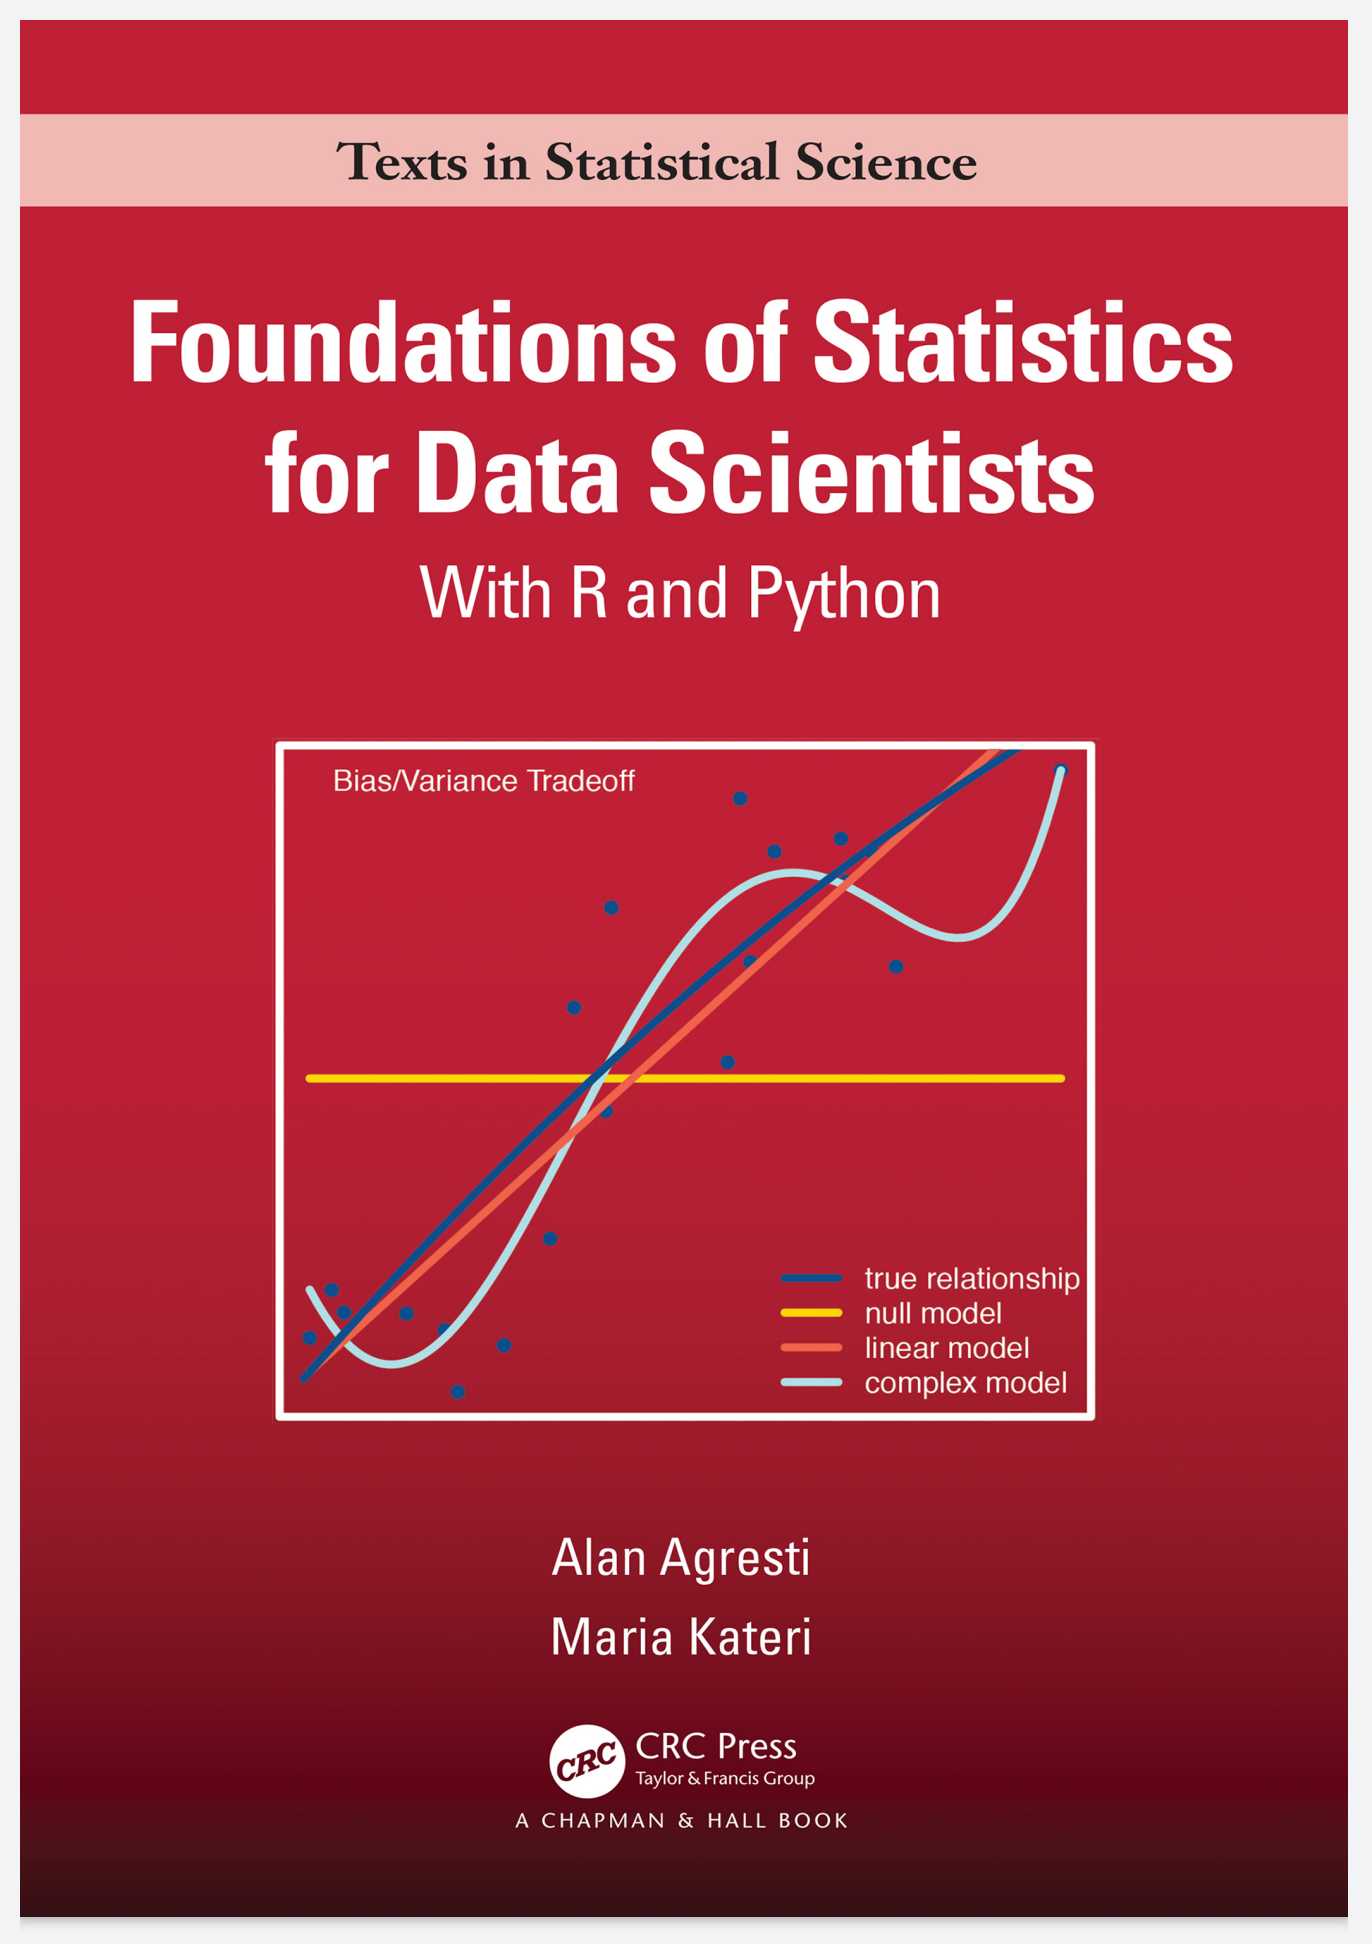 Foundations of Statistics for Data Scientists: With R and Python